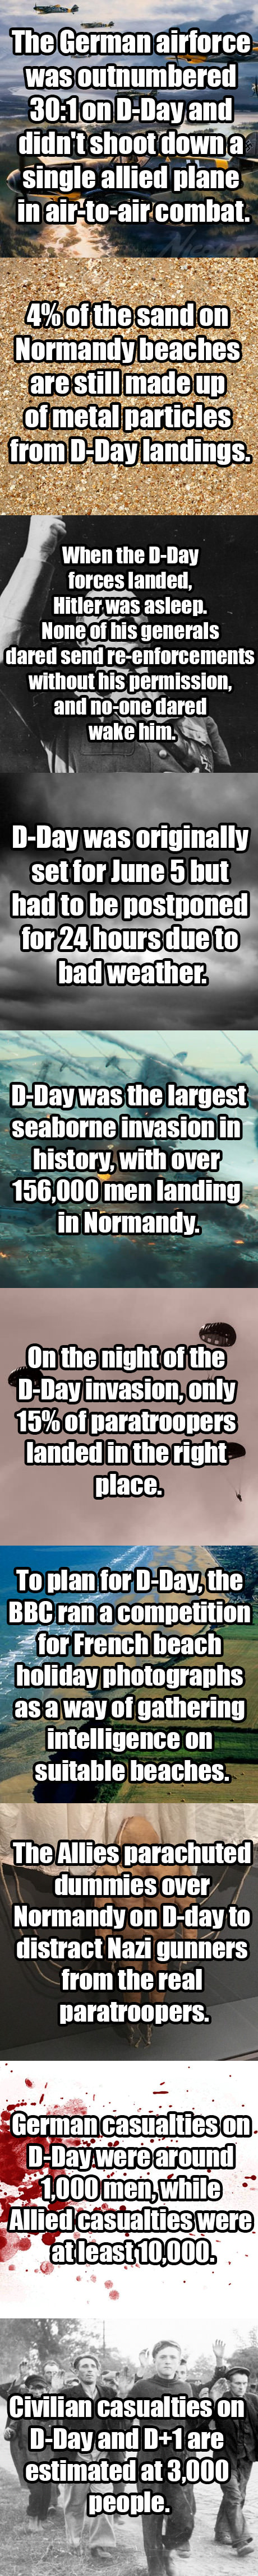 just some facts about d-day